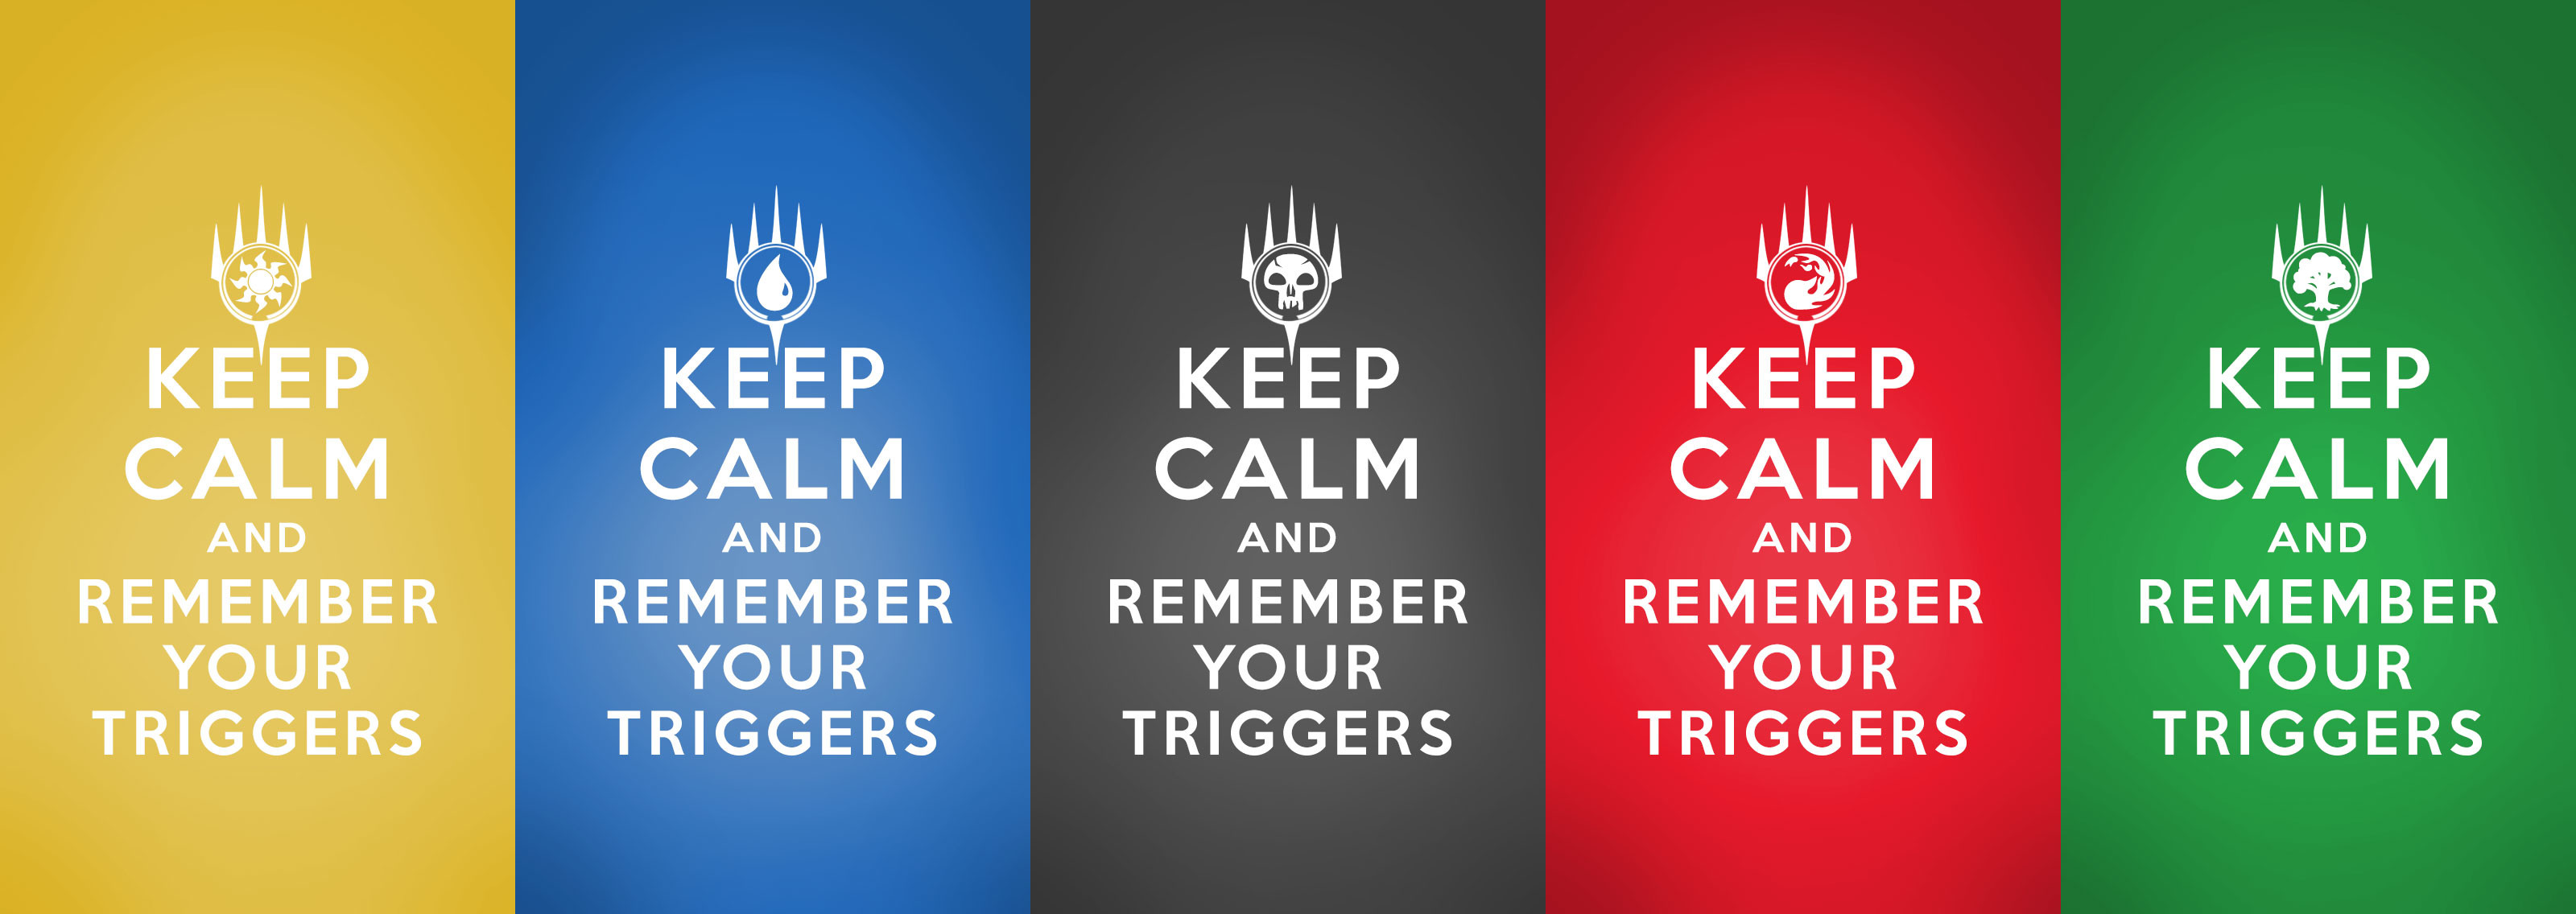 Keep Calm Remember Your Triggers iOS 7 Wallpapers by jessemunoz